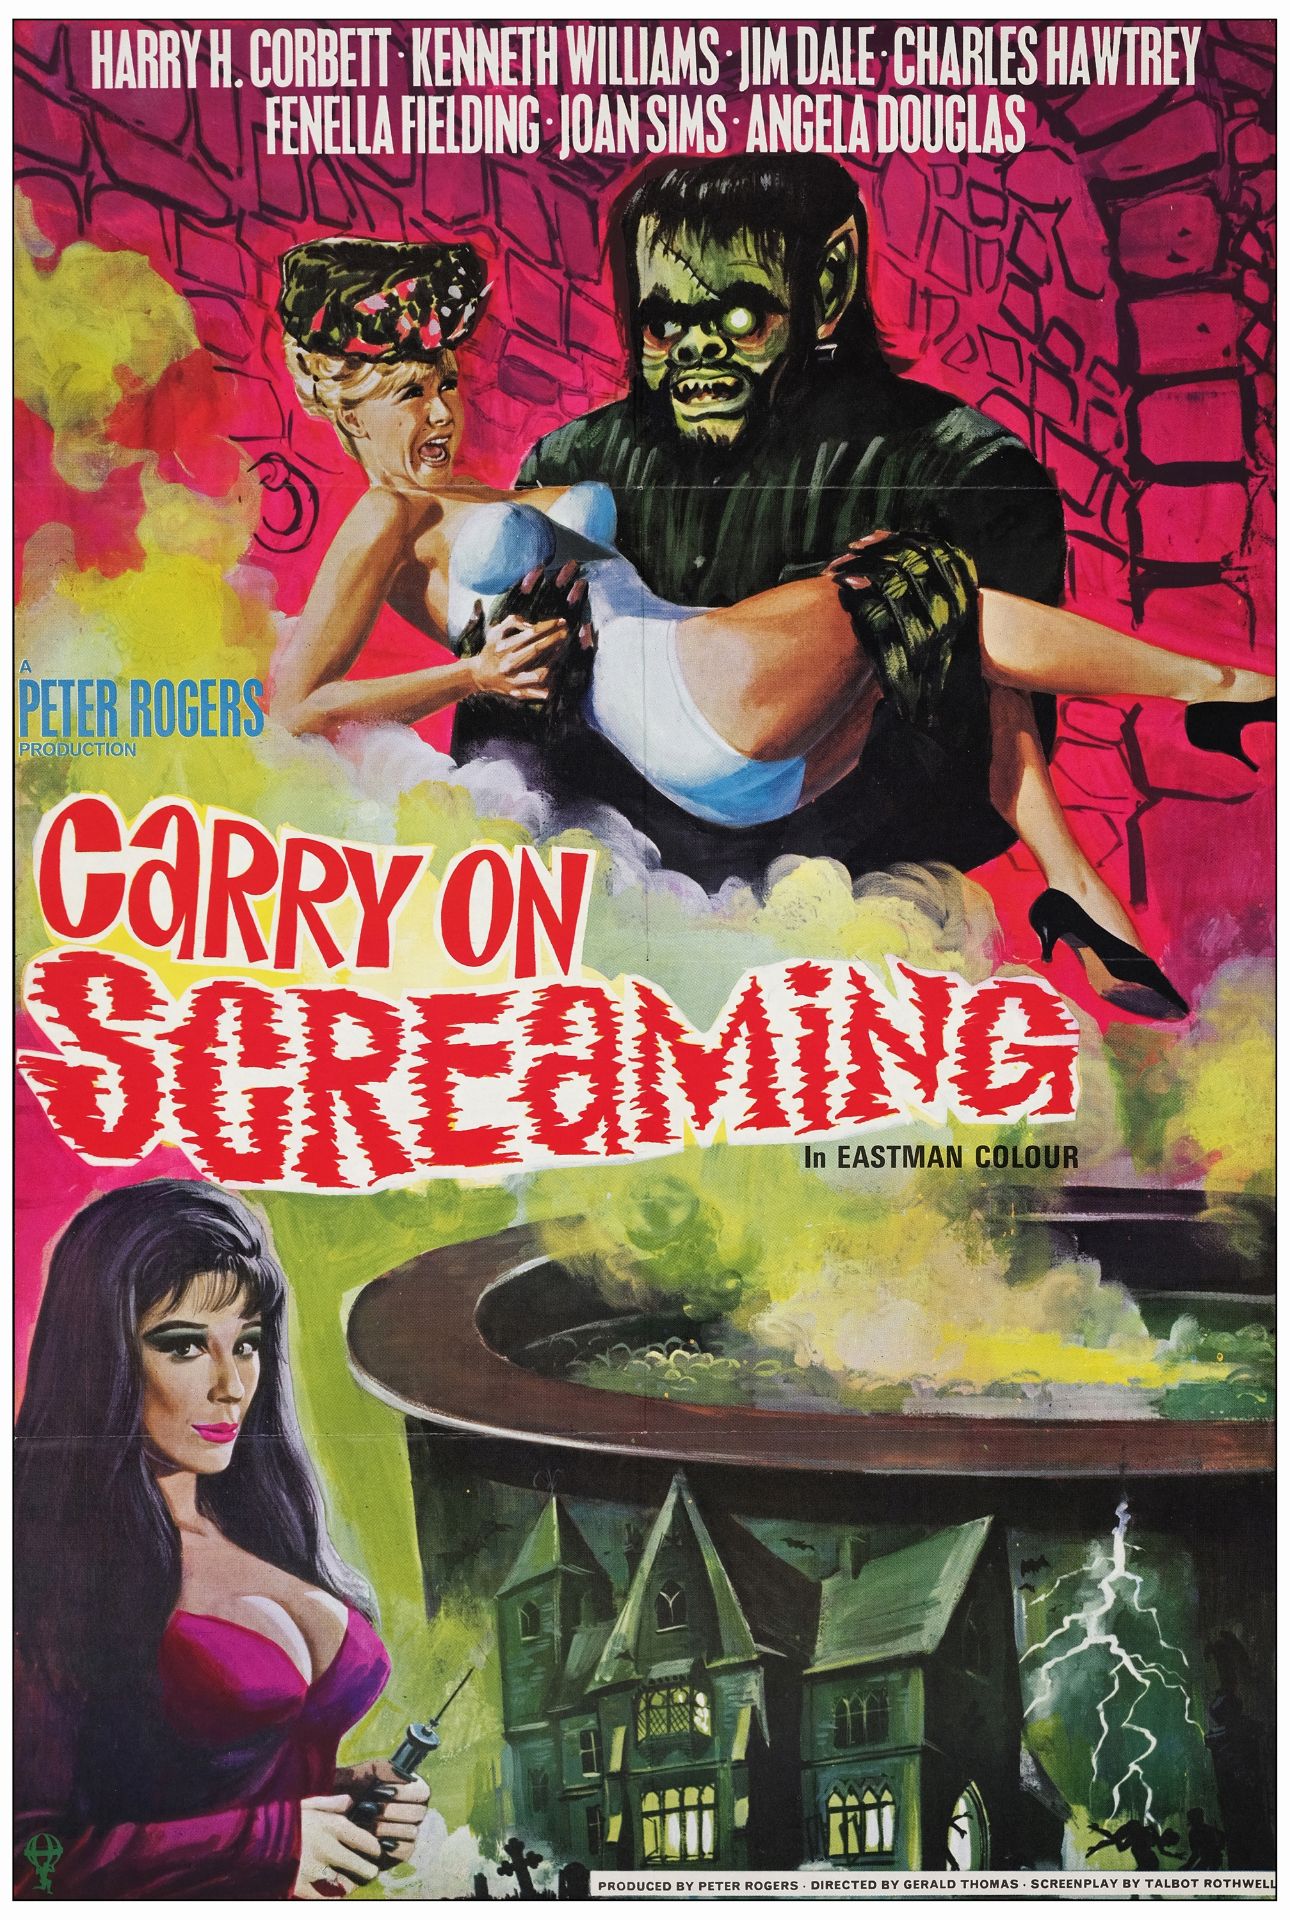 CARRY ON SCREAMING! - Full Bleed British One Sheet (27" x 40"); Very Fine+ Folded